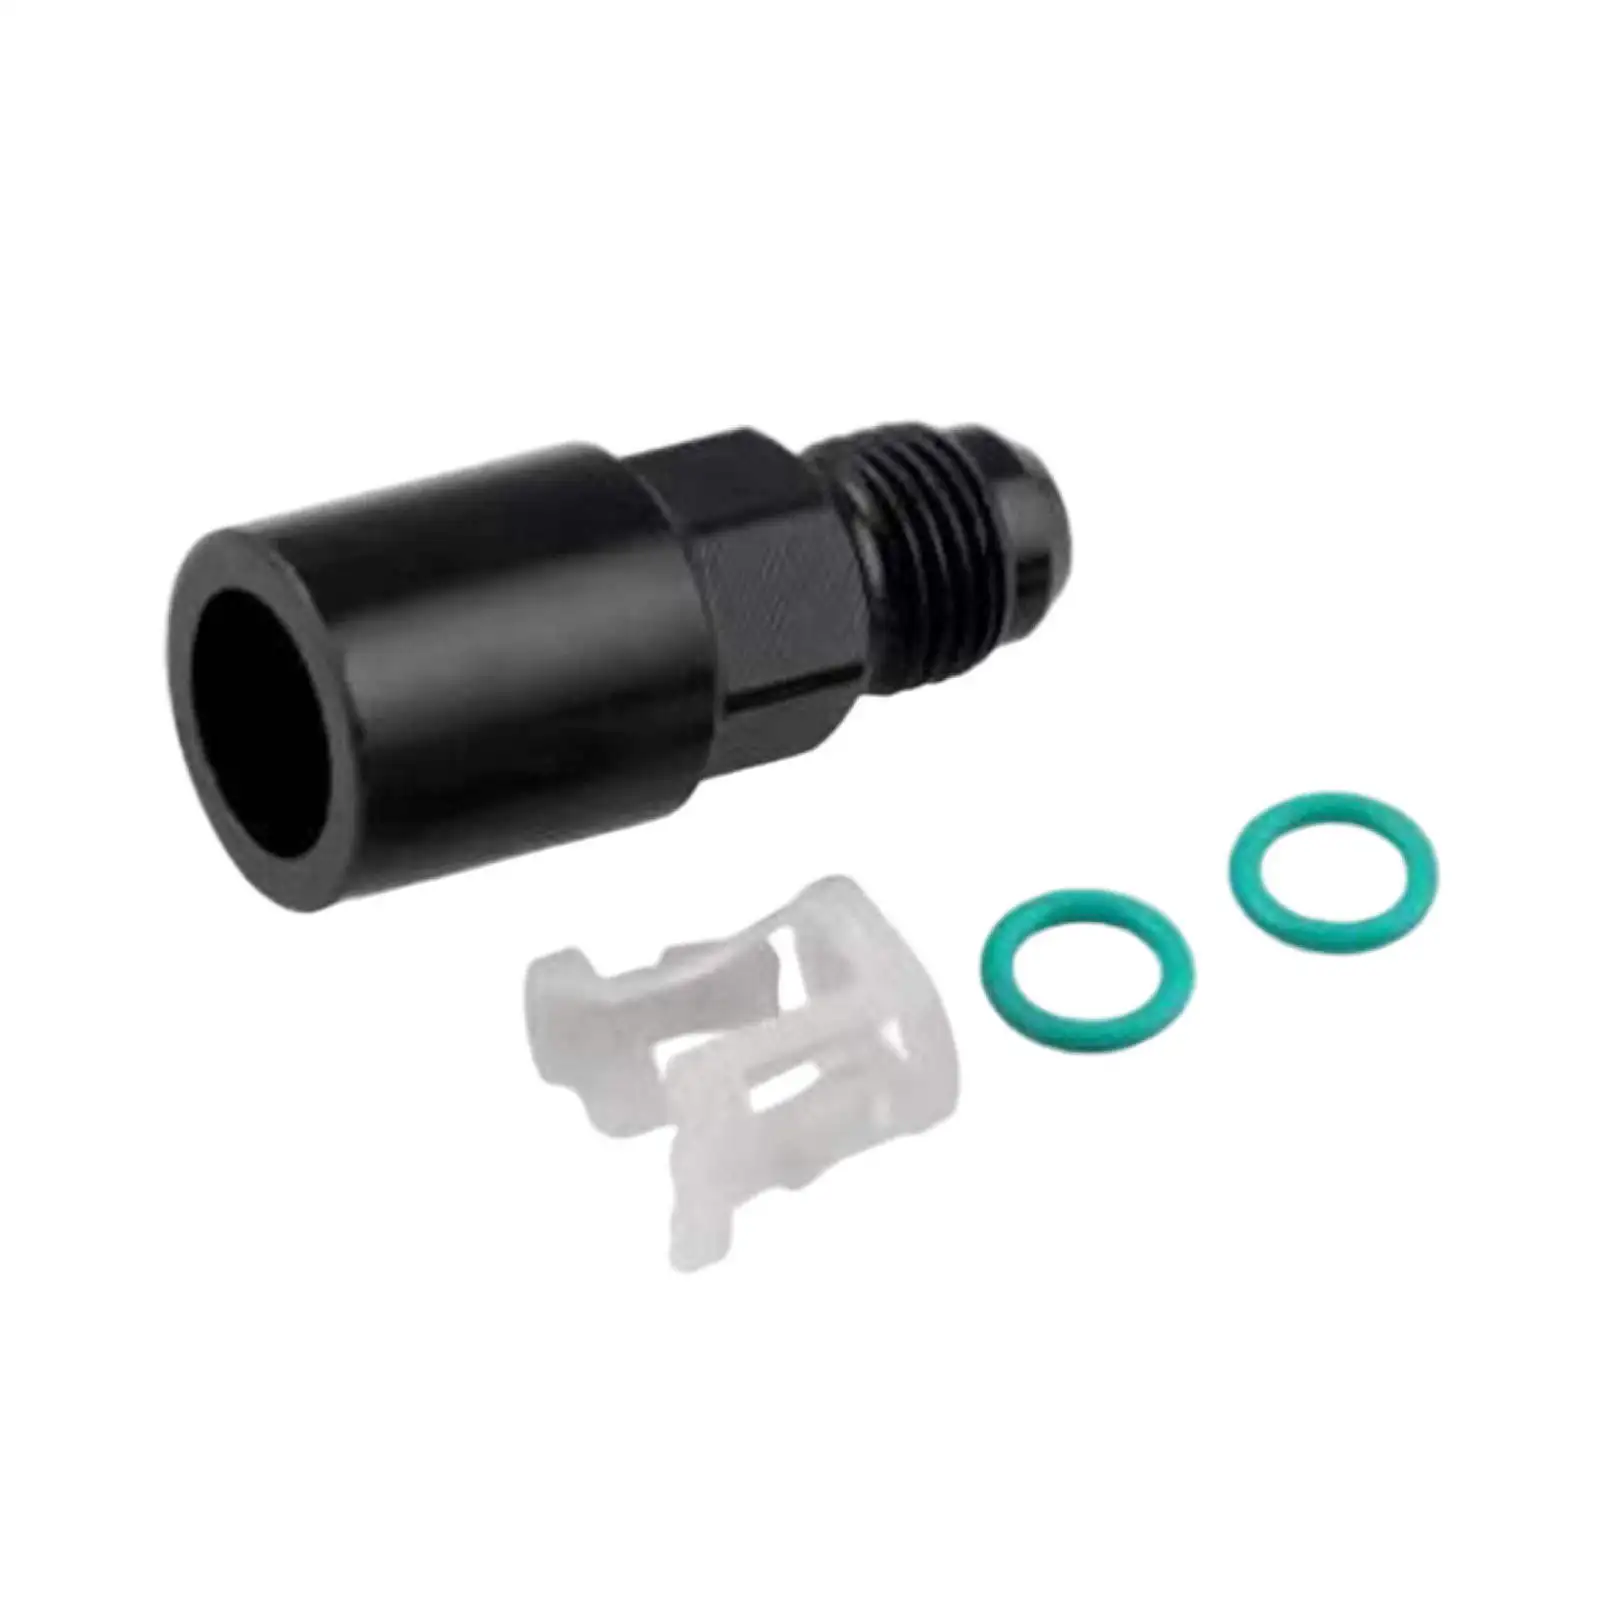 Fuel Adapter Fitting 6AN to 5/16 GM Black LS W/ Clip Female Quick Connect Oil Line Swivel Pipe Adapter Fit for LT1 LT4 LS1